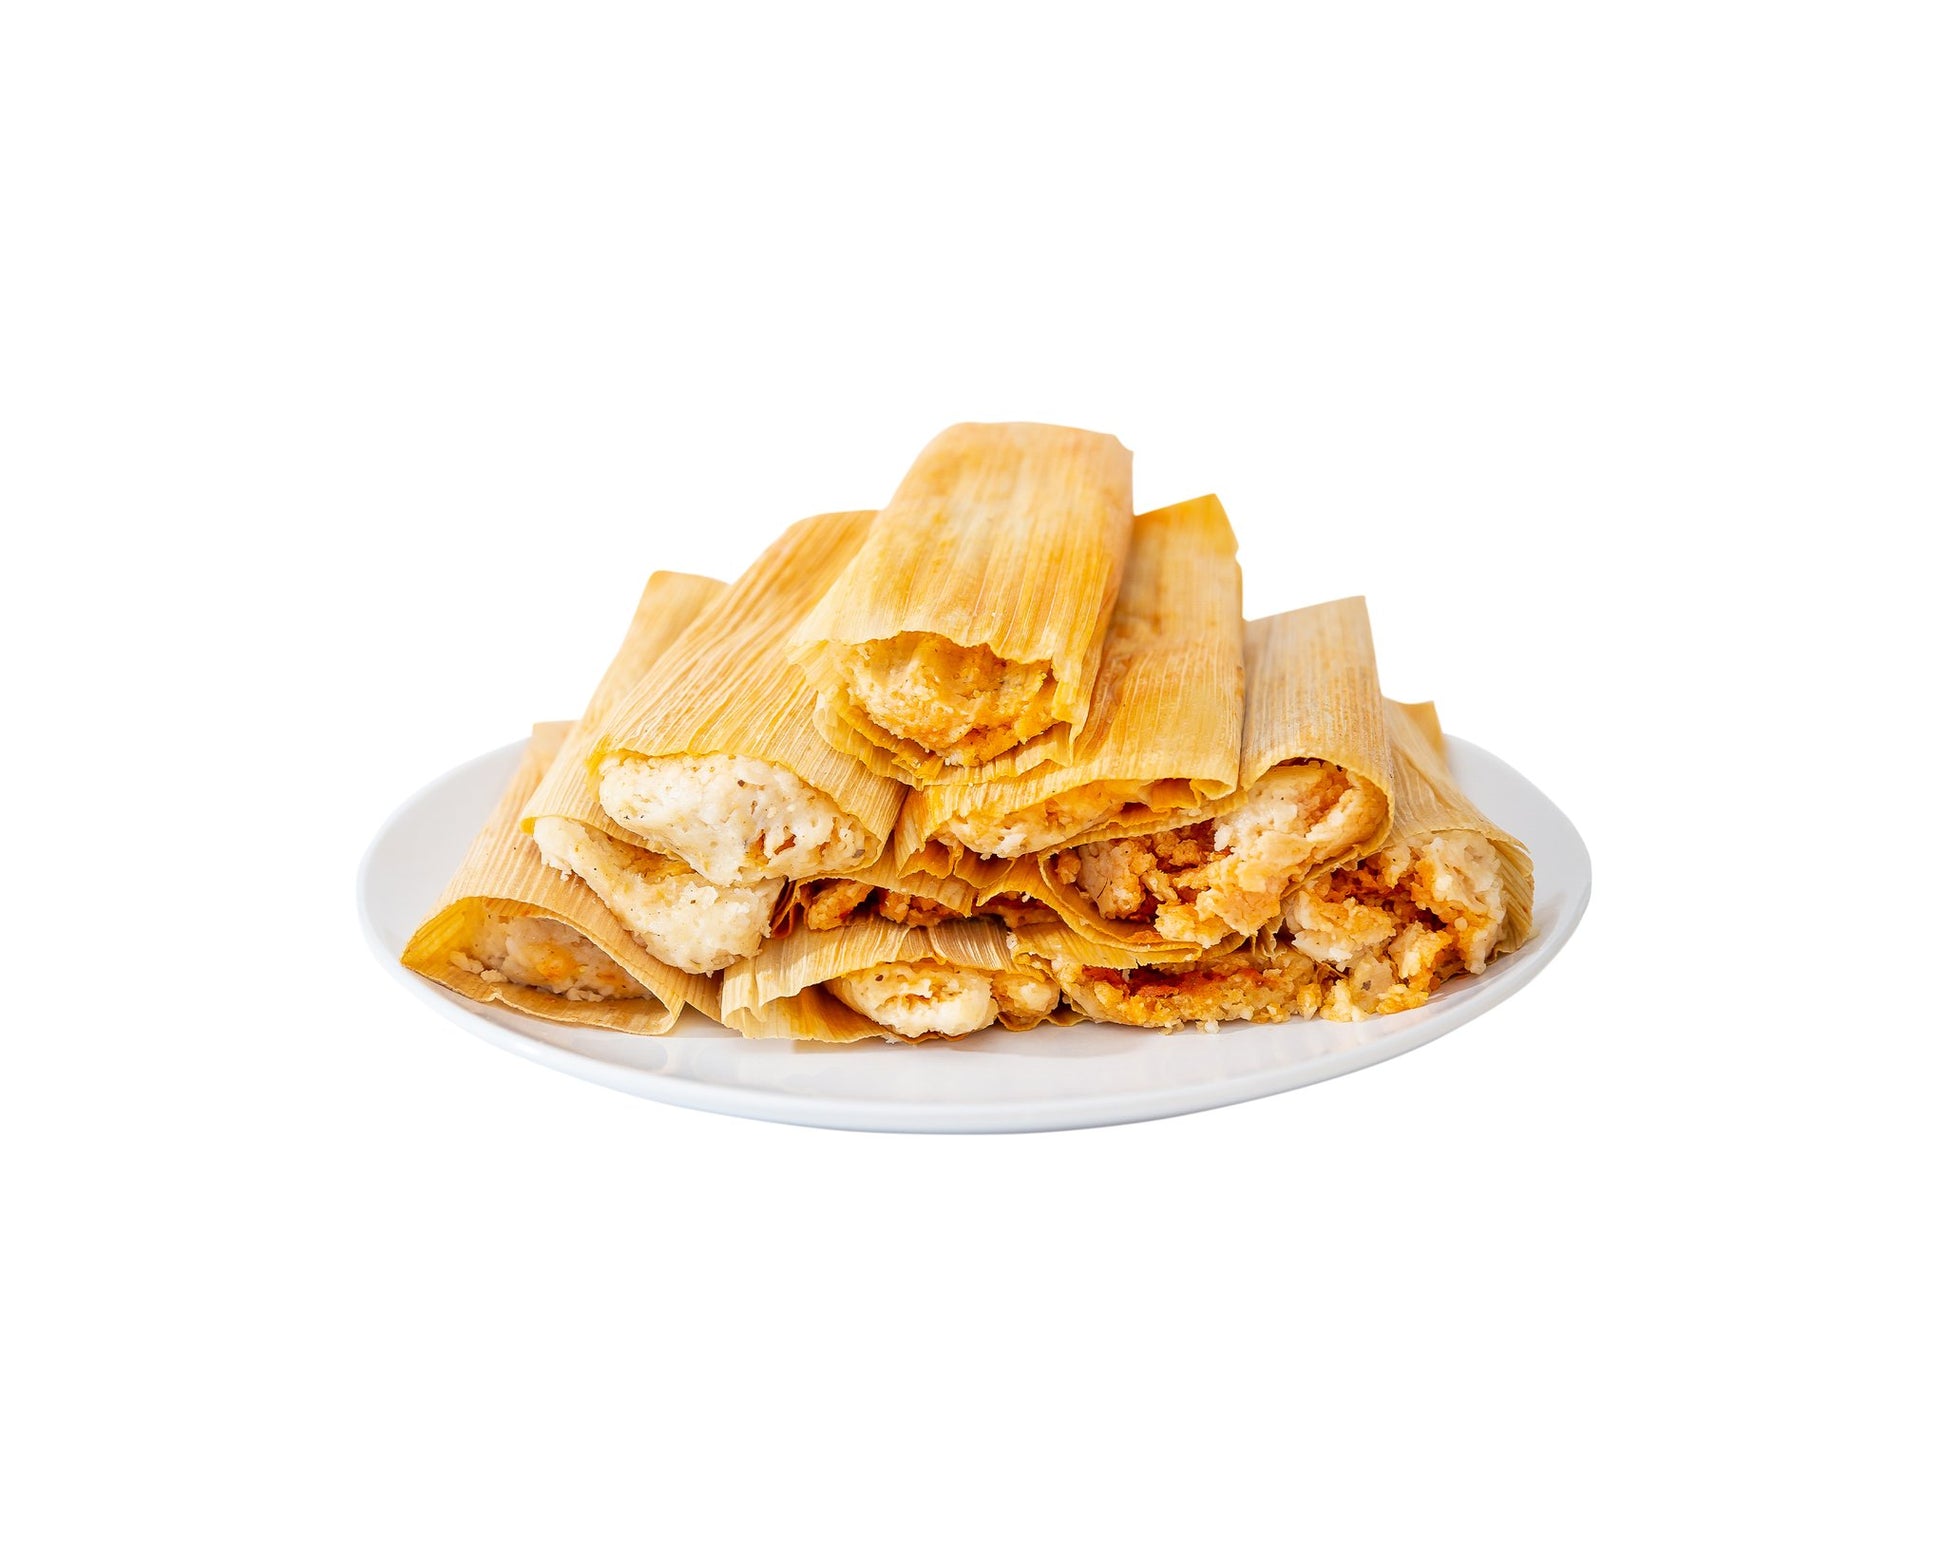 Small Tin Can - Delicious Tamales